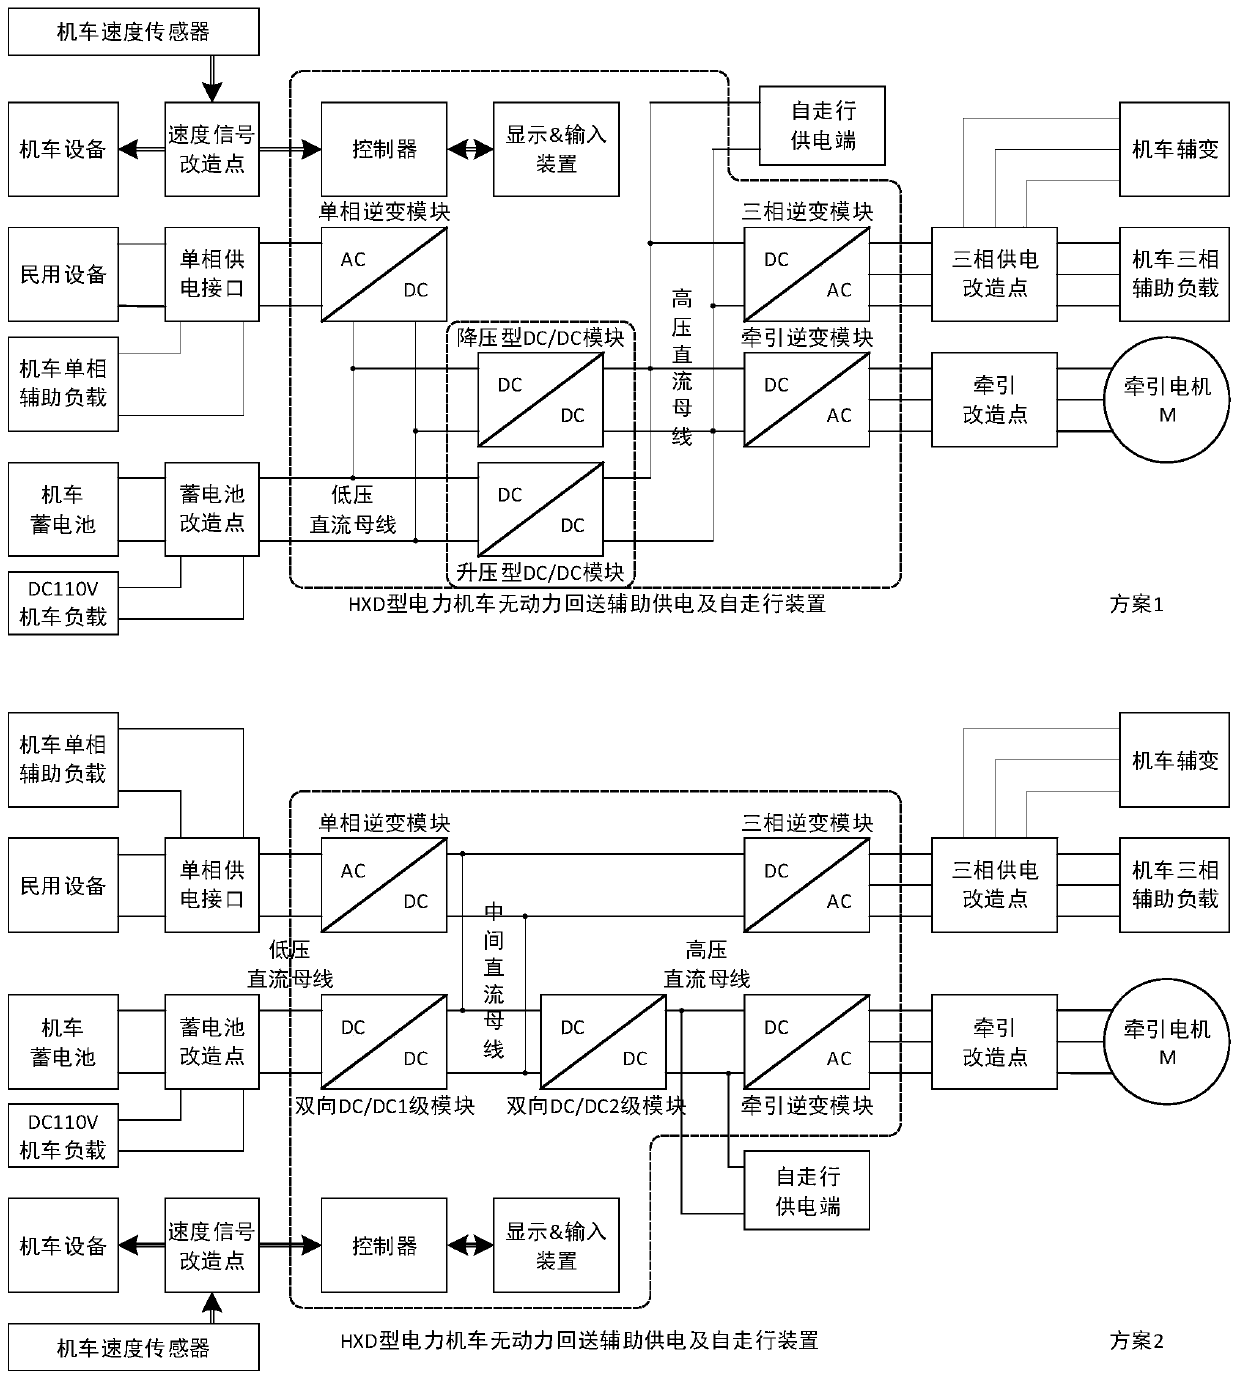 Unpowered loopback auxiliary power supply and self-walking device for locomotives